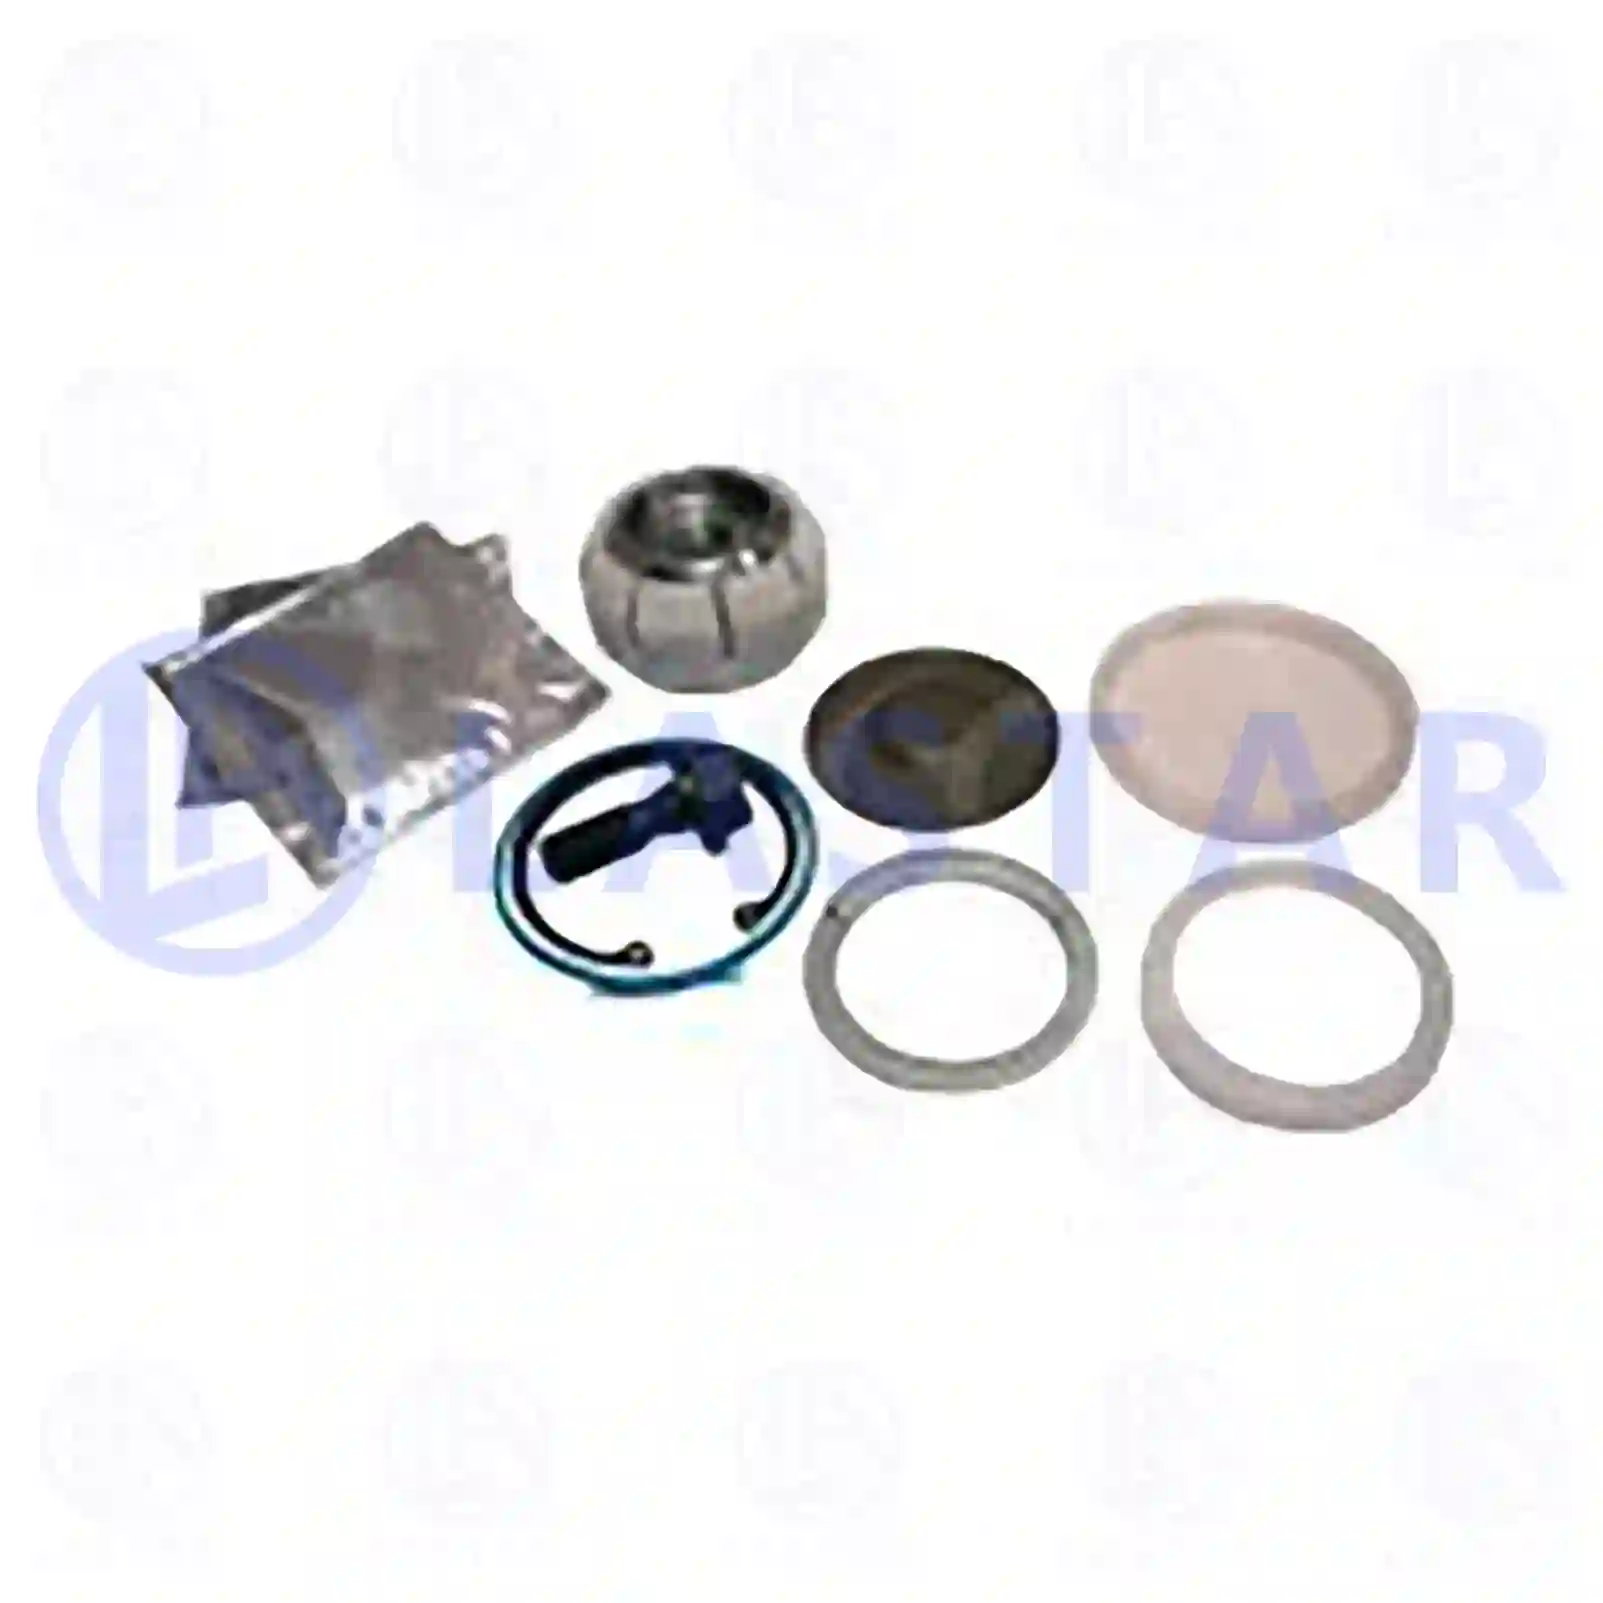 Repair kit, v-stay, 77729736, 93161631, 93161632, ||  77729736 Lastar Spare Part | Truck Spare Parts, Auotomotive Spare Parts Repair kit, v-stay, 77729736, 93161631, 93161632, ||  77729736 Lastar Spare Part | Truck Spare Parts, Auotomotive Spare Parts